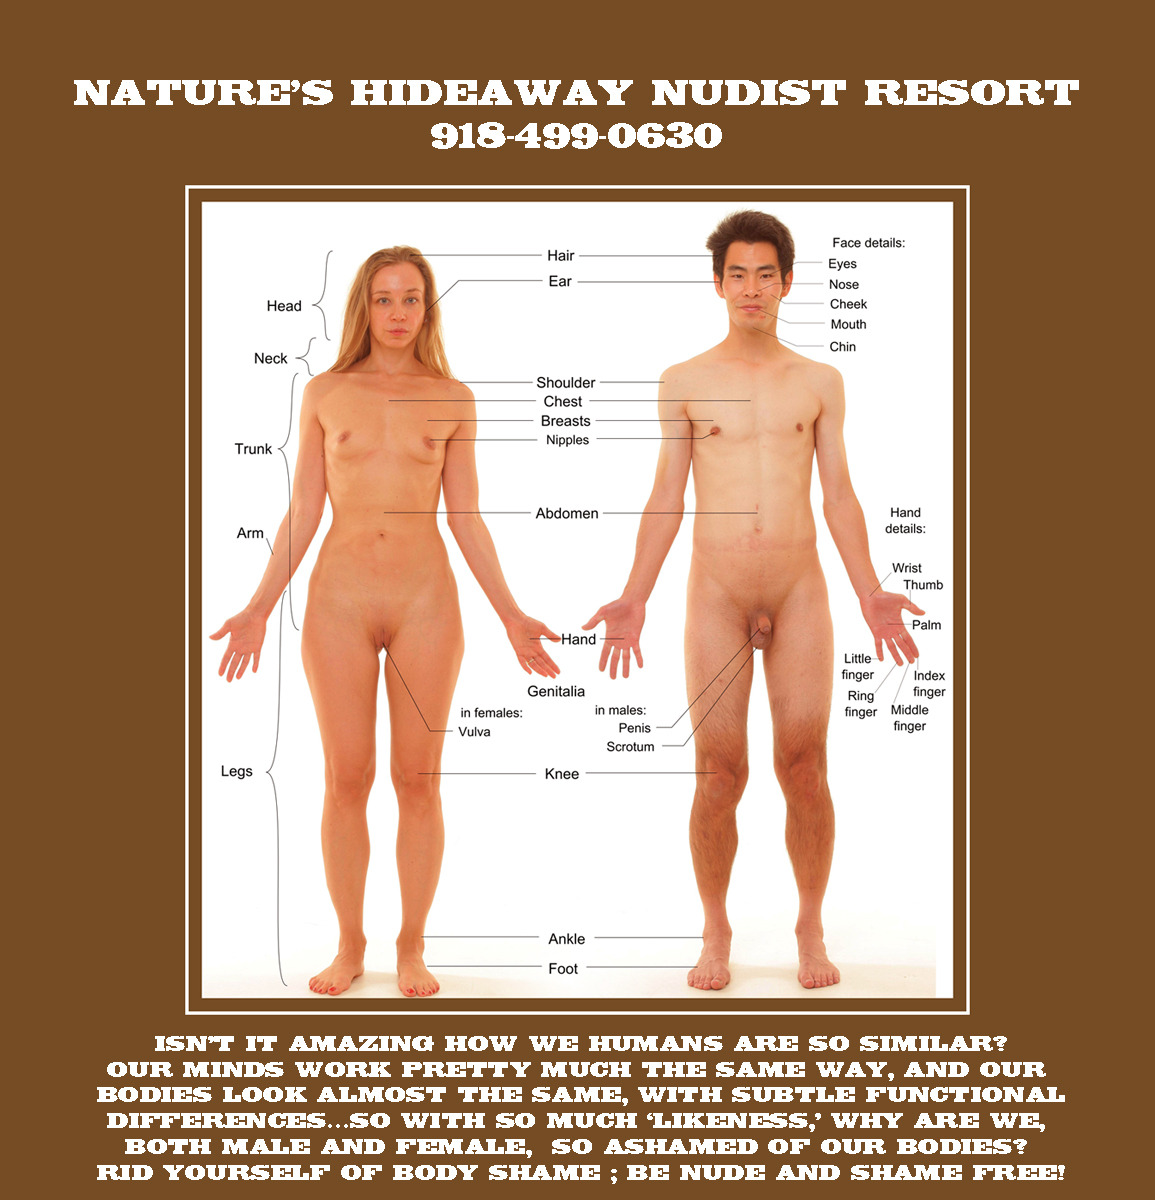 Nudism is fun and emotionally and physically healthy. Enjoy nudism with your family